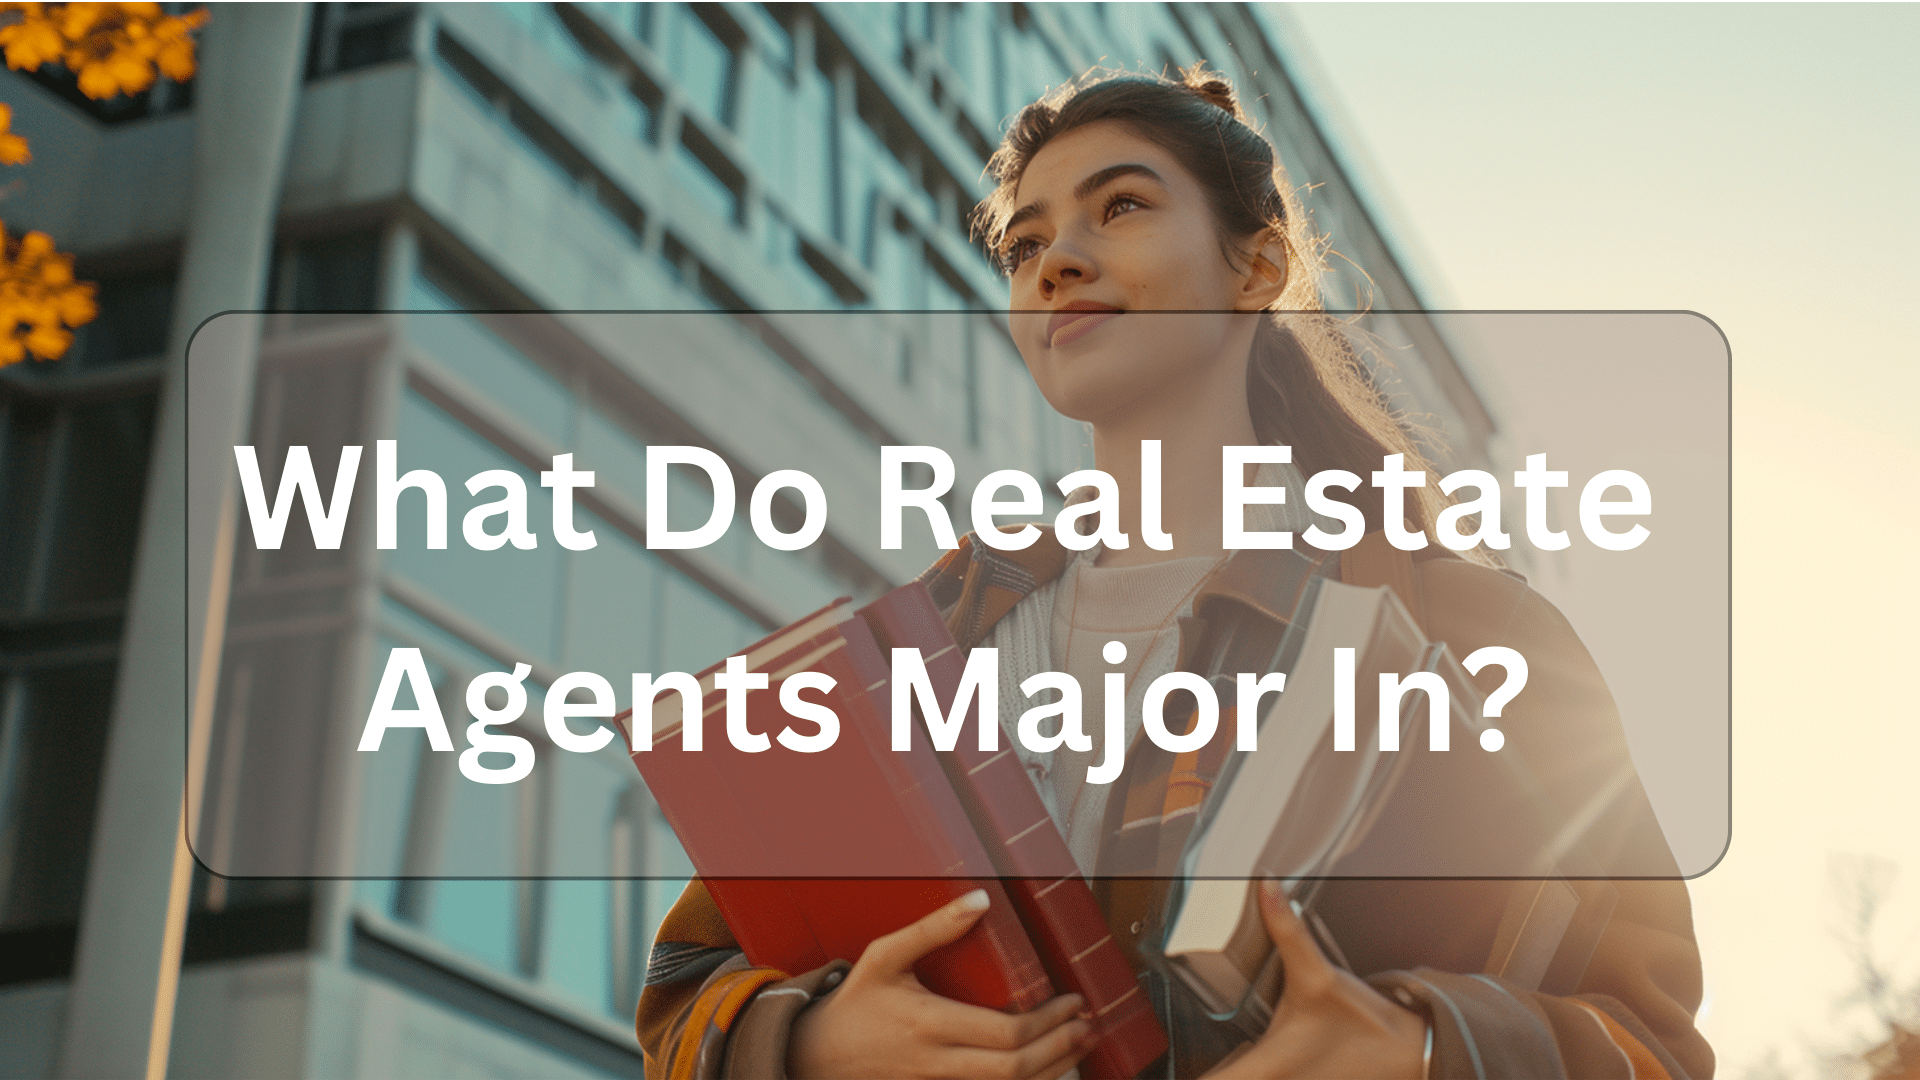 What Do Real Estate Agents Major In Illustration